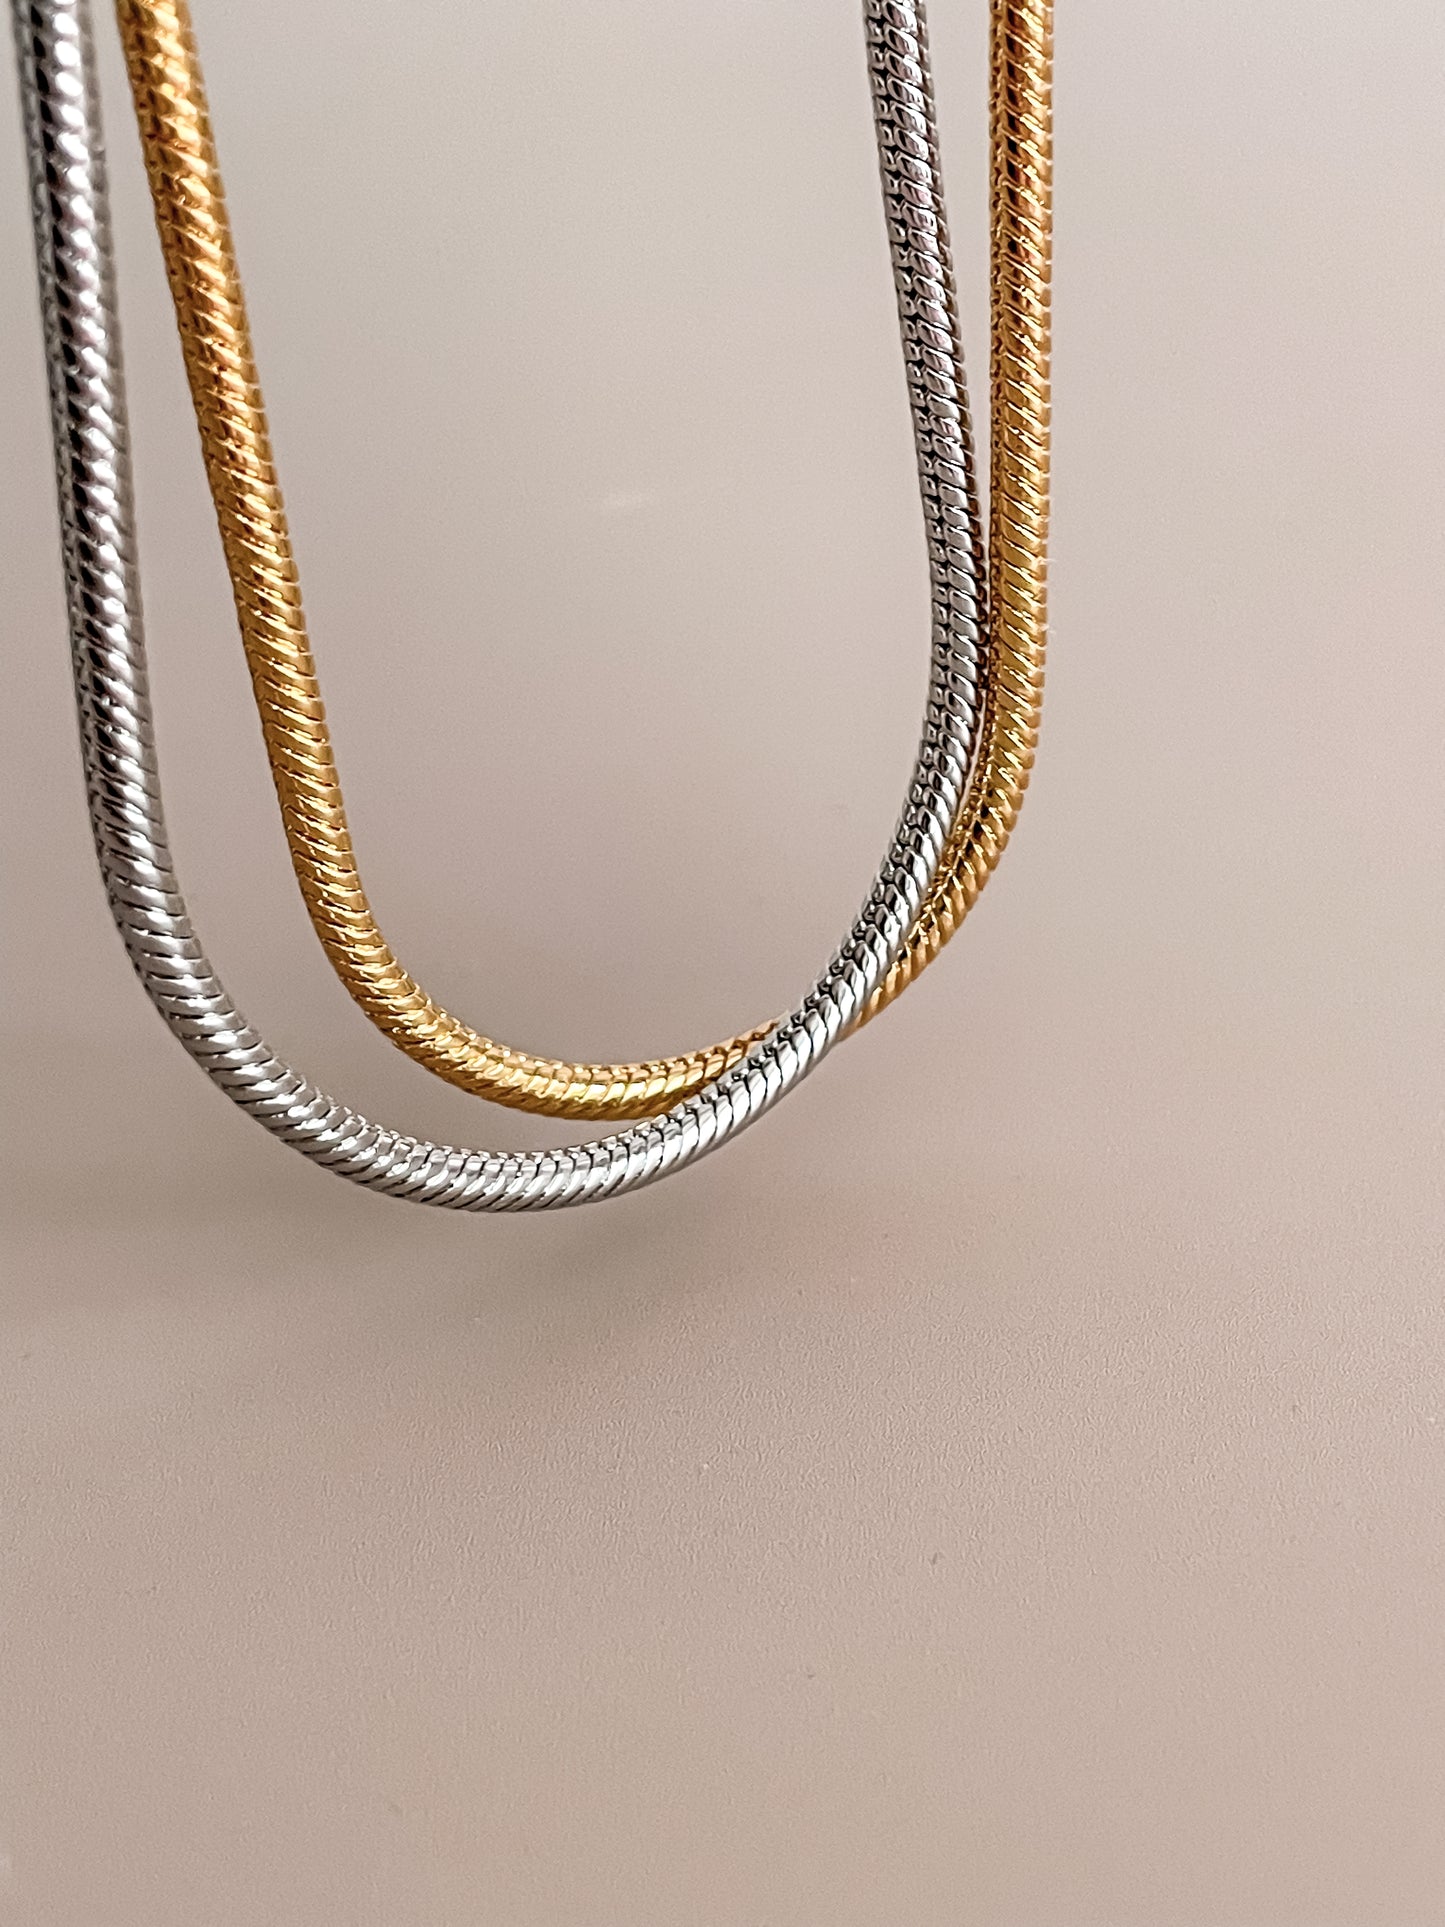 Minimalist Unique Hook Closure 18K Gold Plated Snake Chain